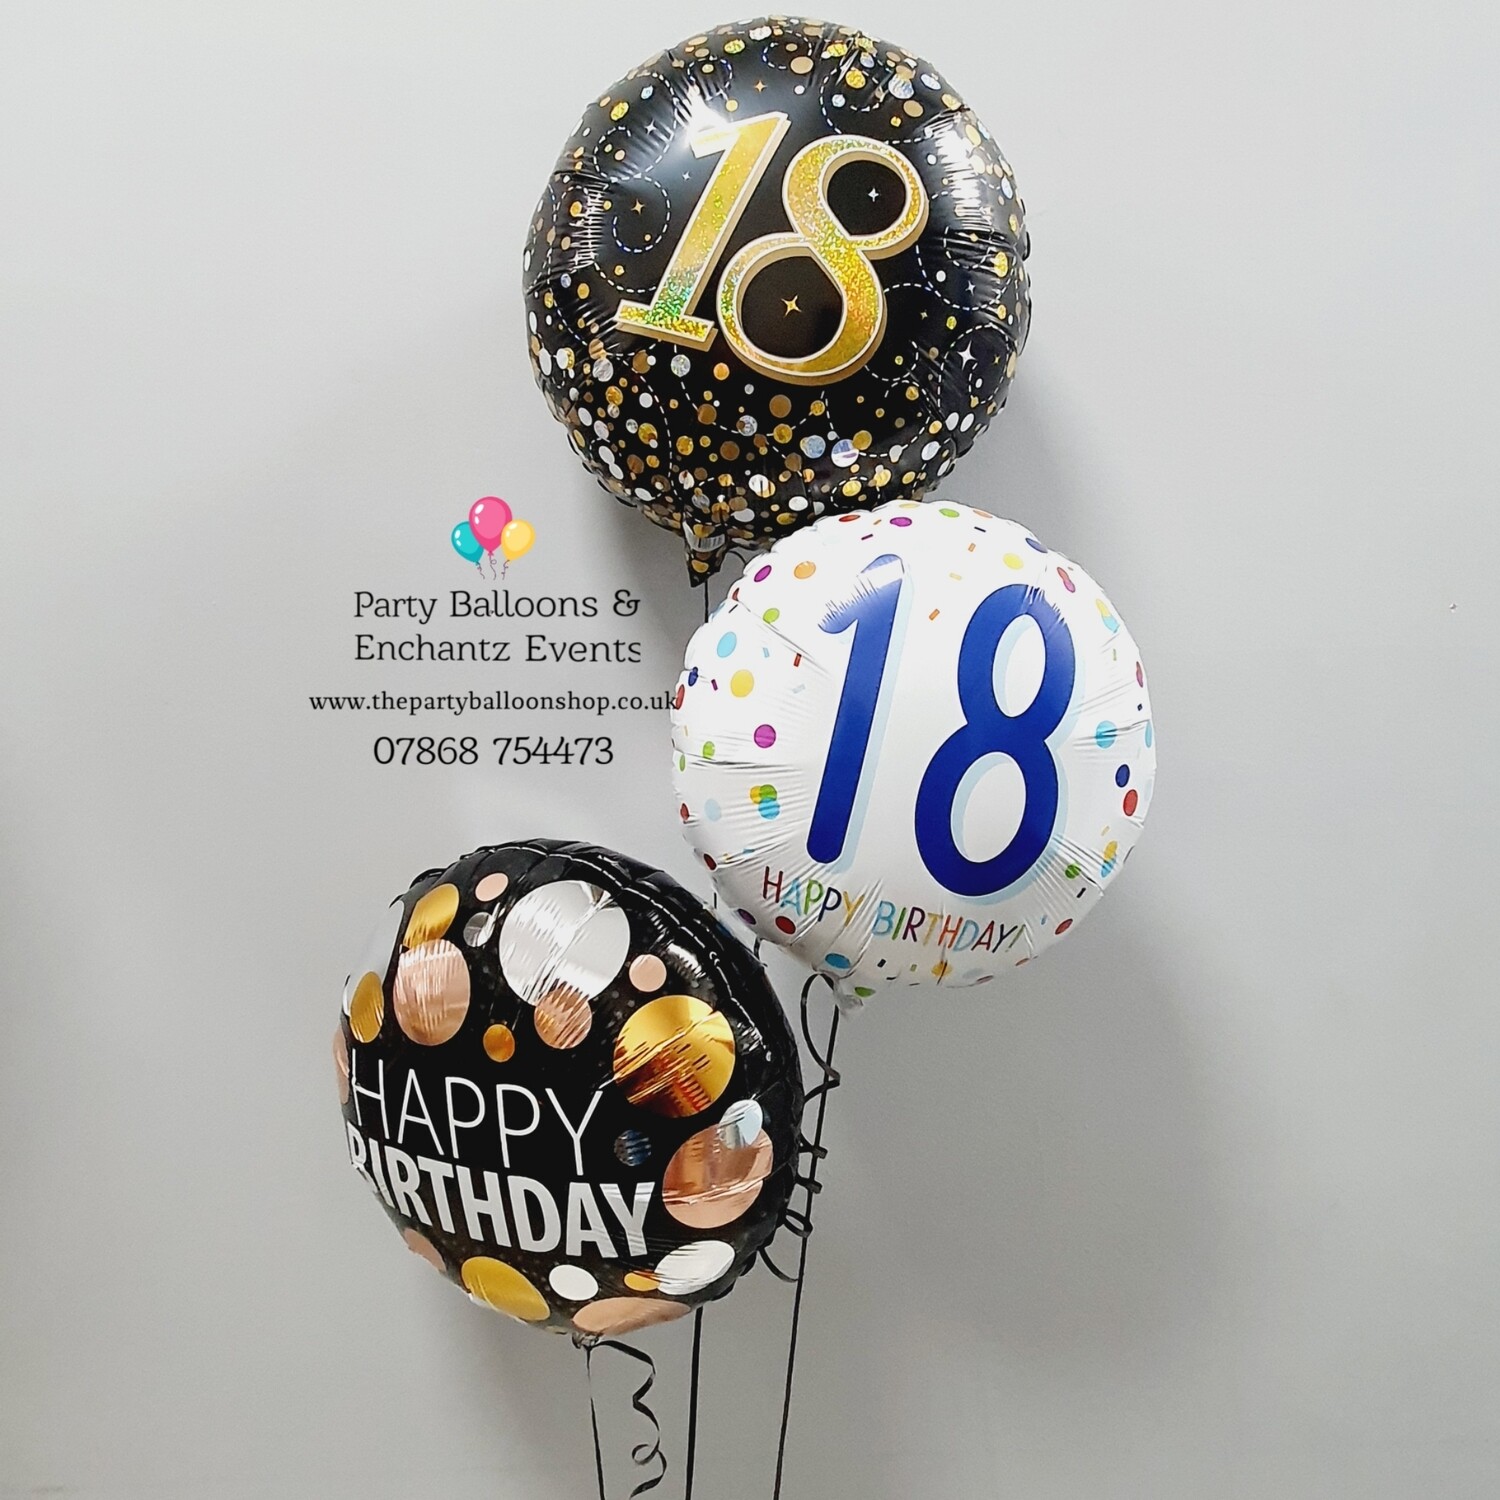 Foil Balloon bouquet with 3 Balloons